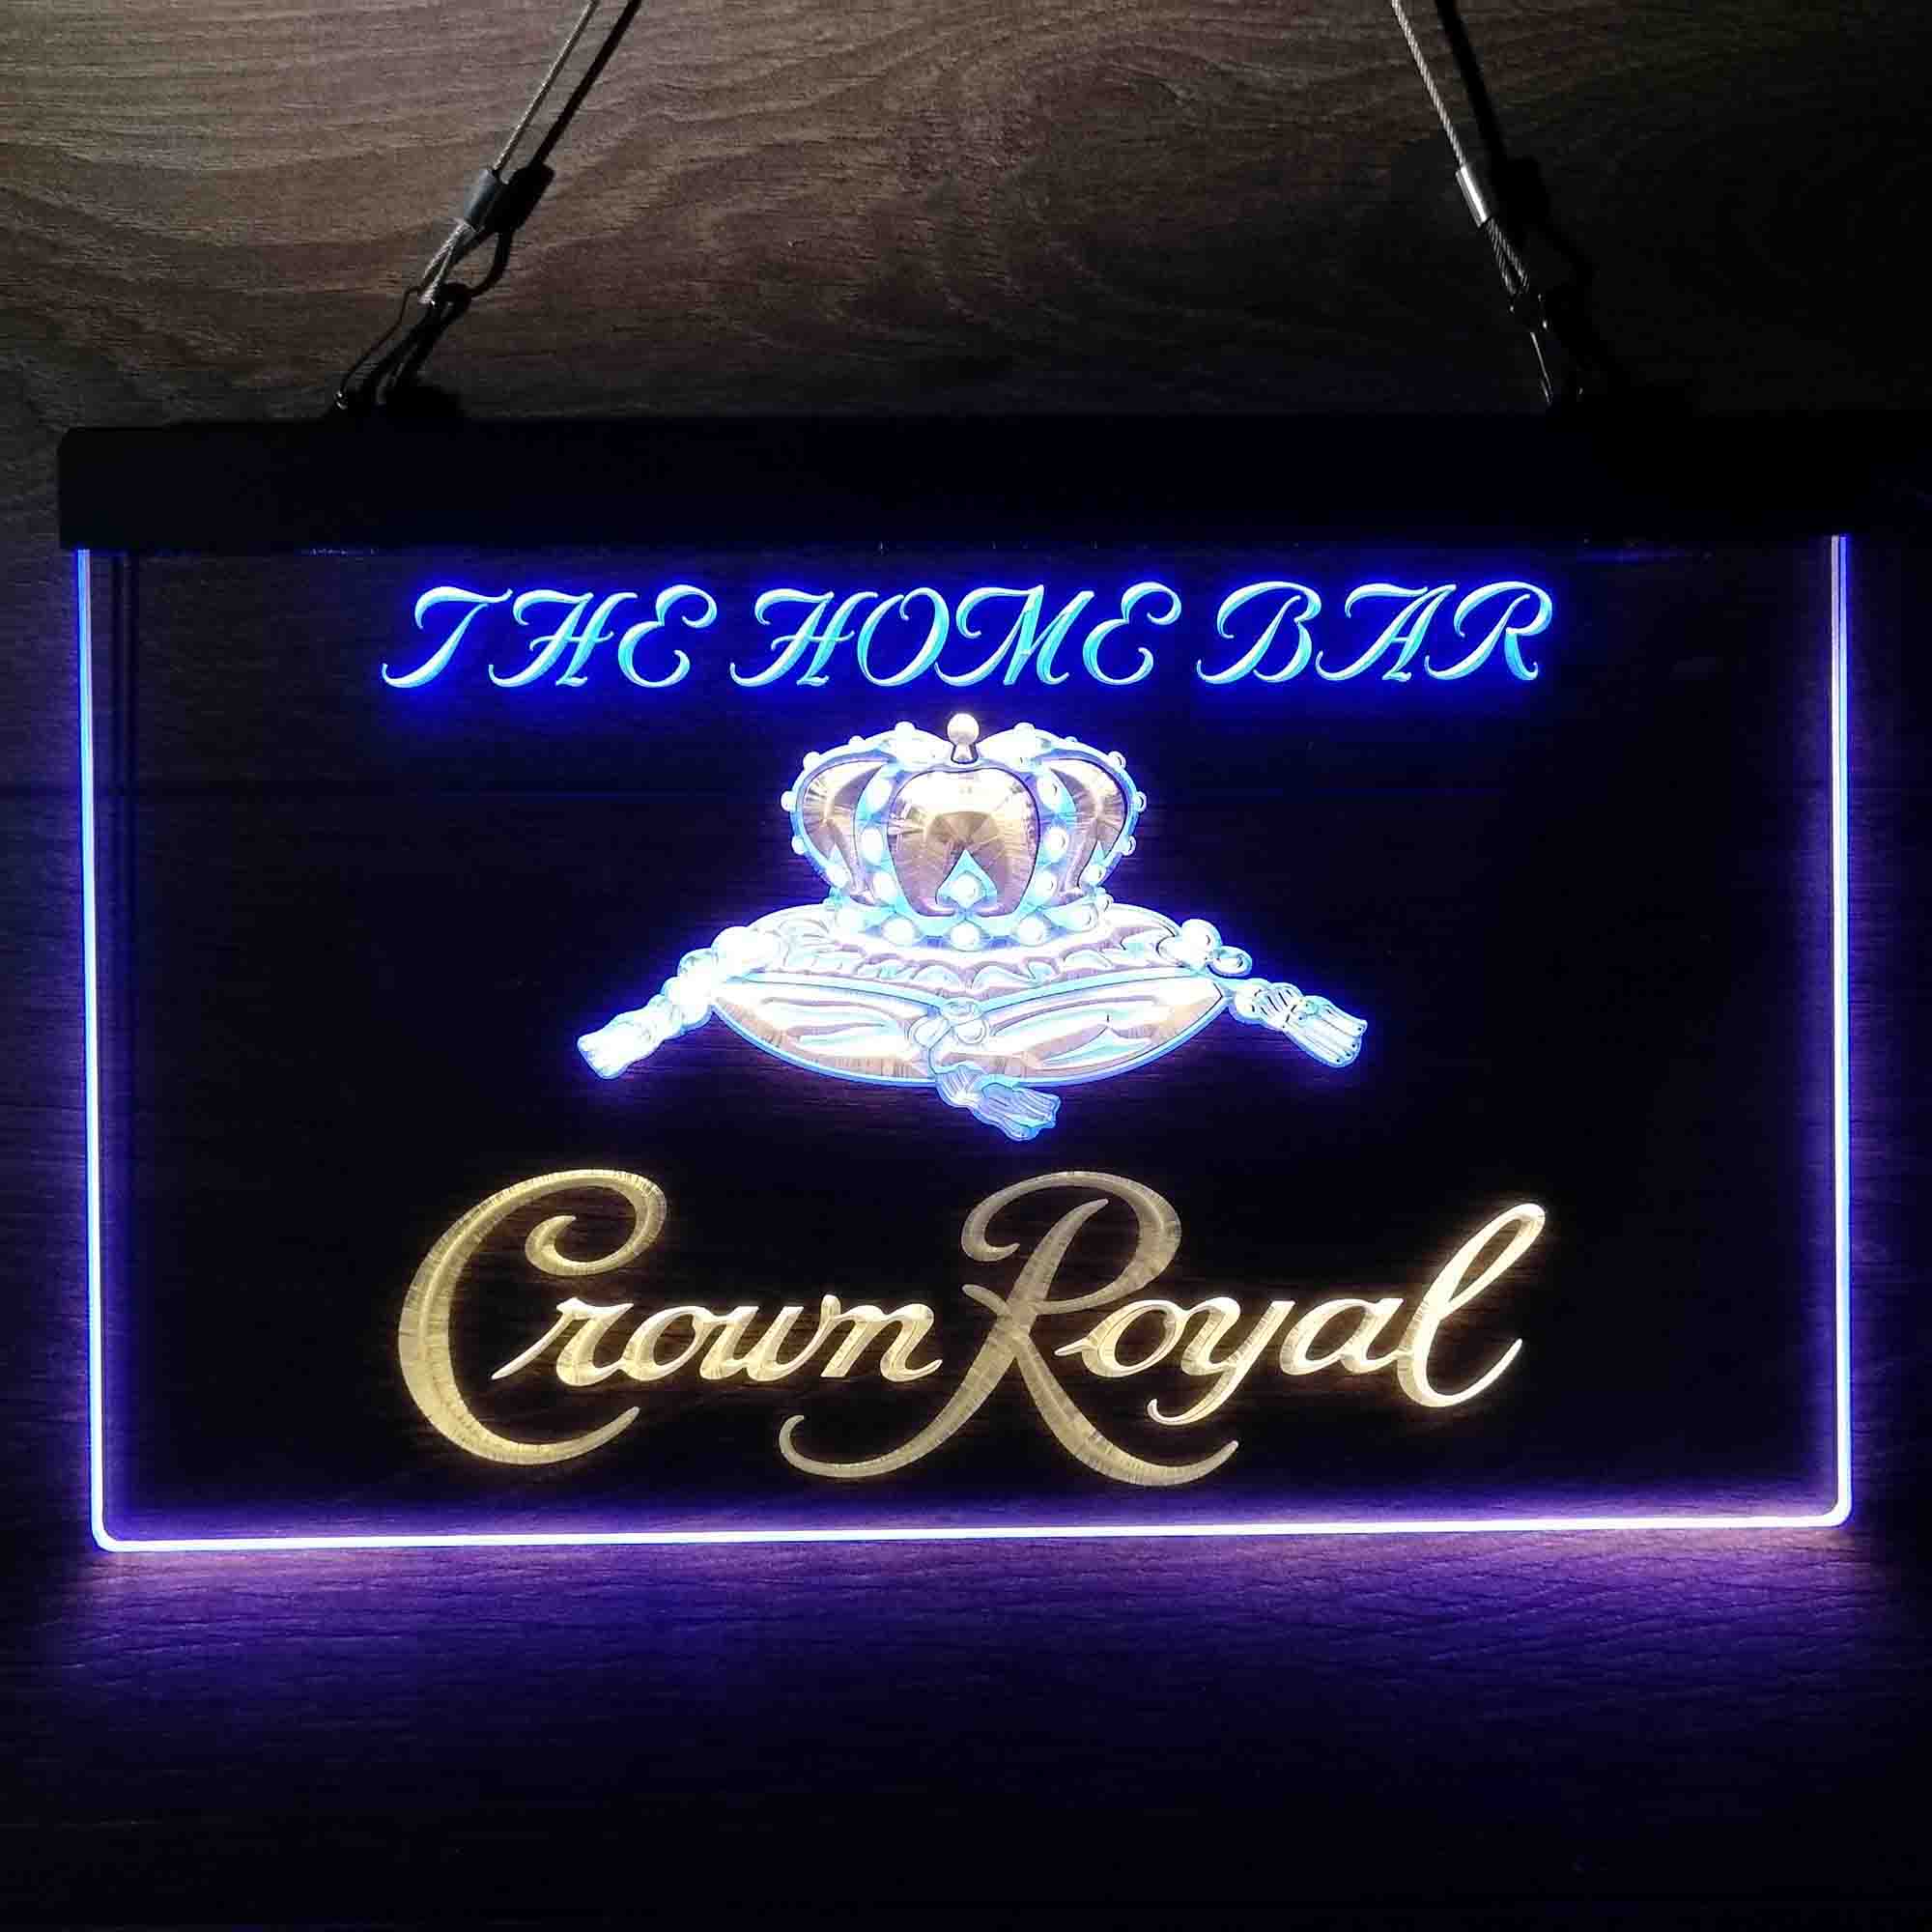 Personalized Crown Royal Beer Bar Neon-Like LED Sign - Custom Wall Decor Gift